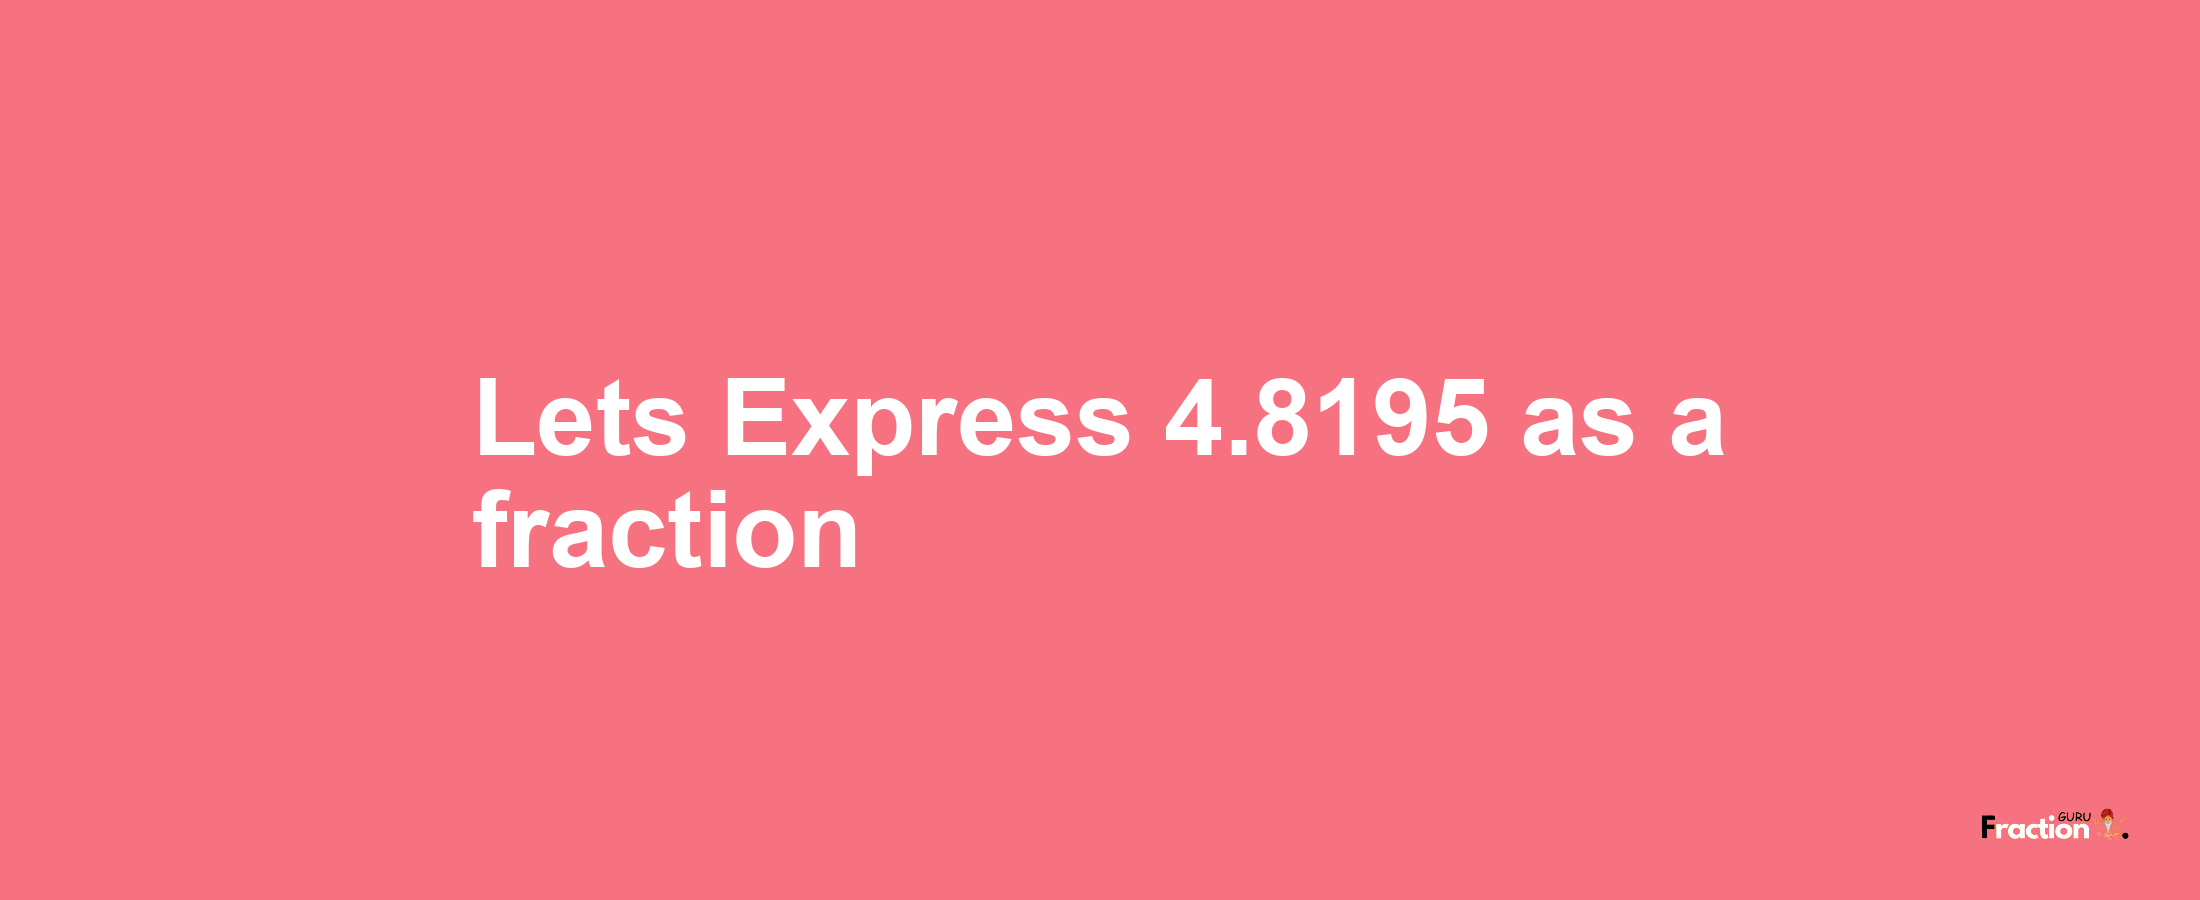 Lets Express 4.8195 as afraction